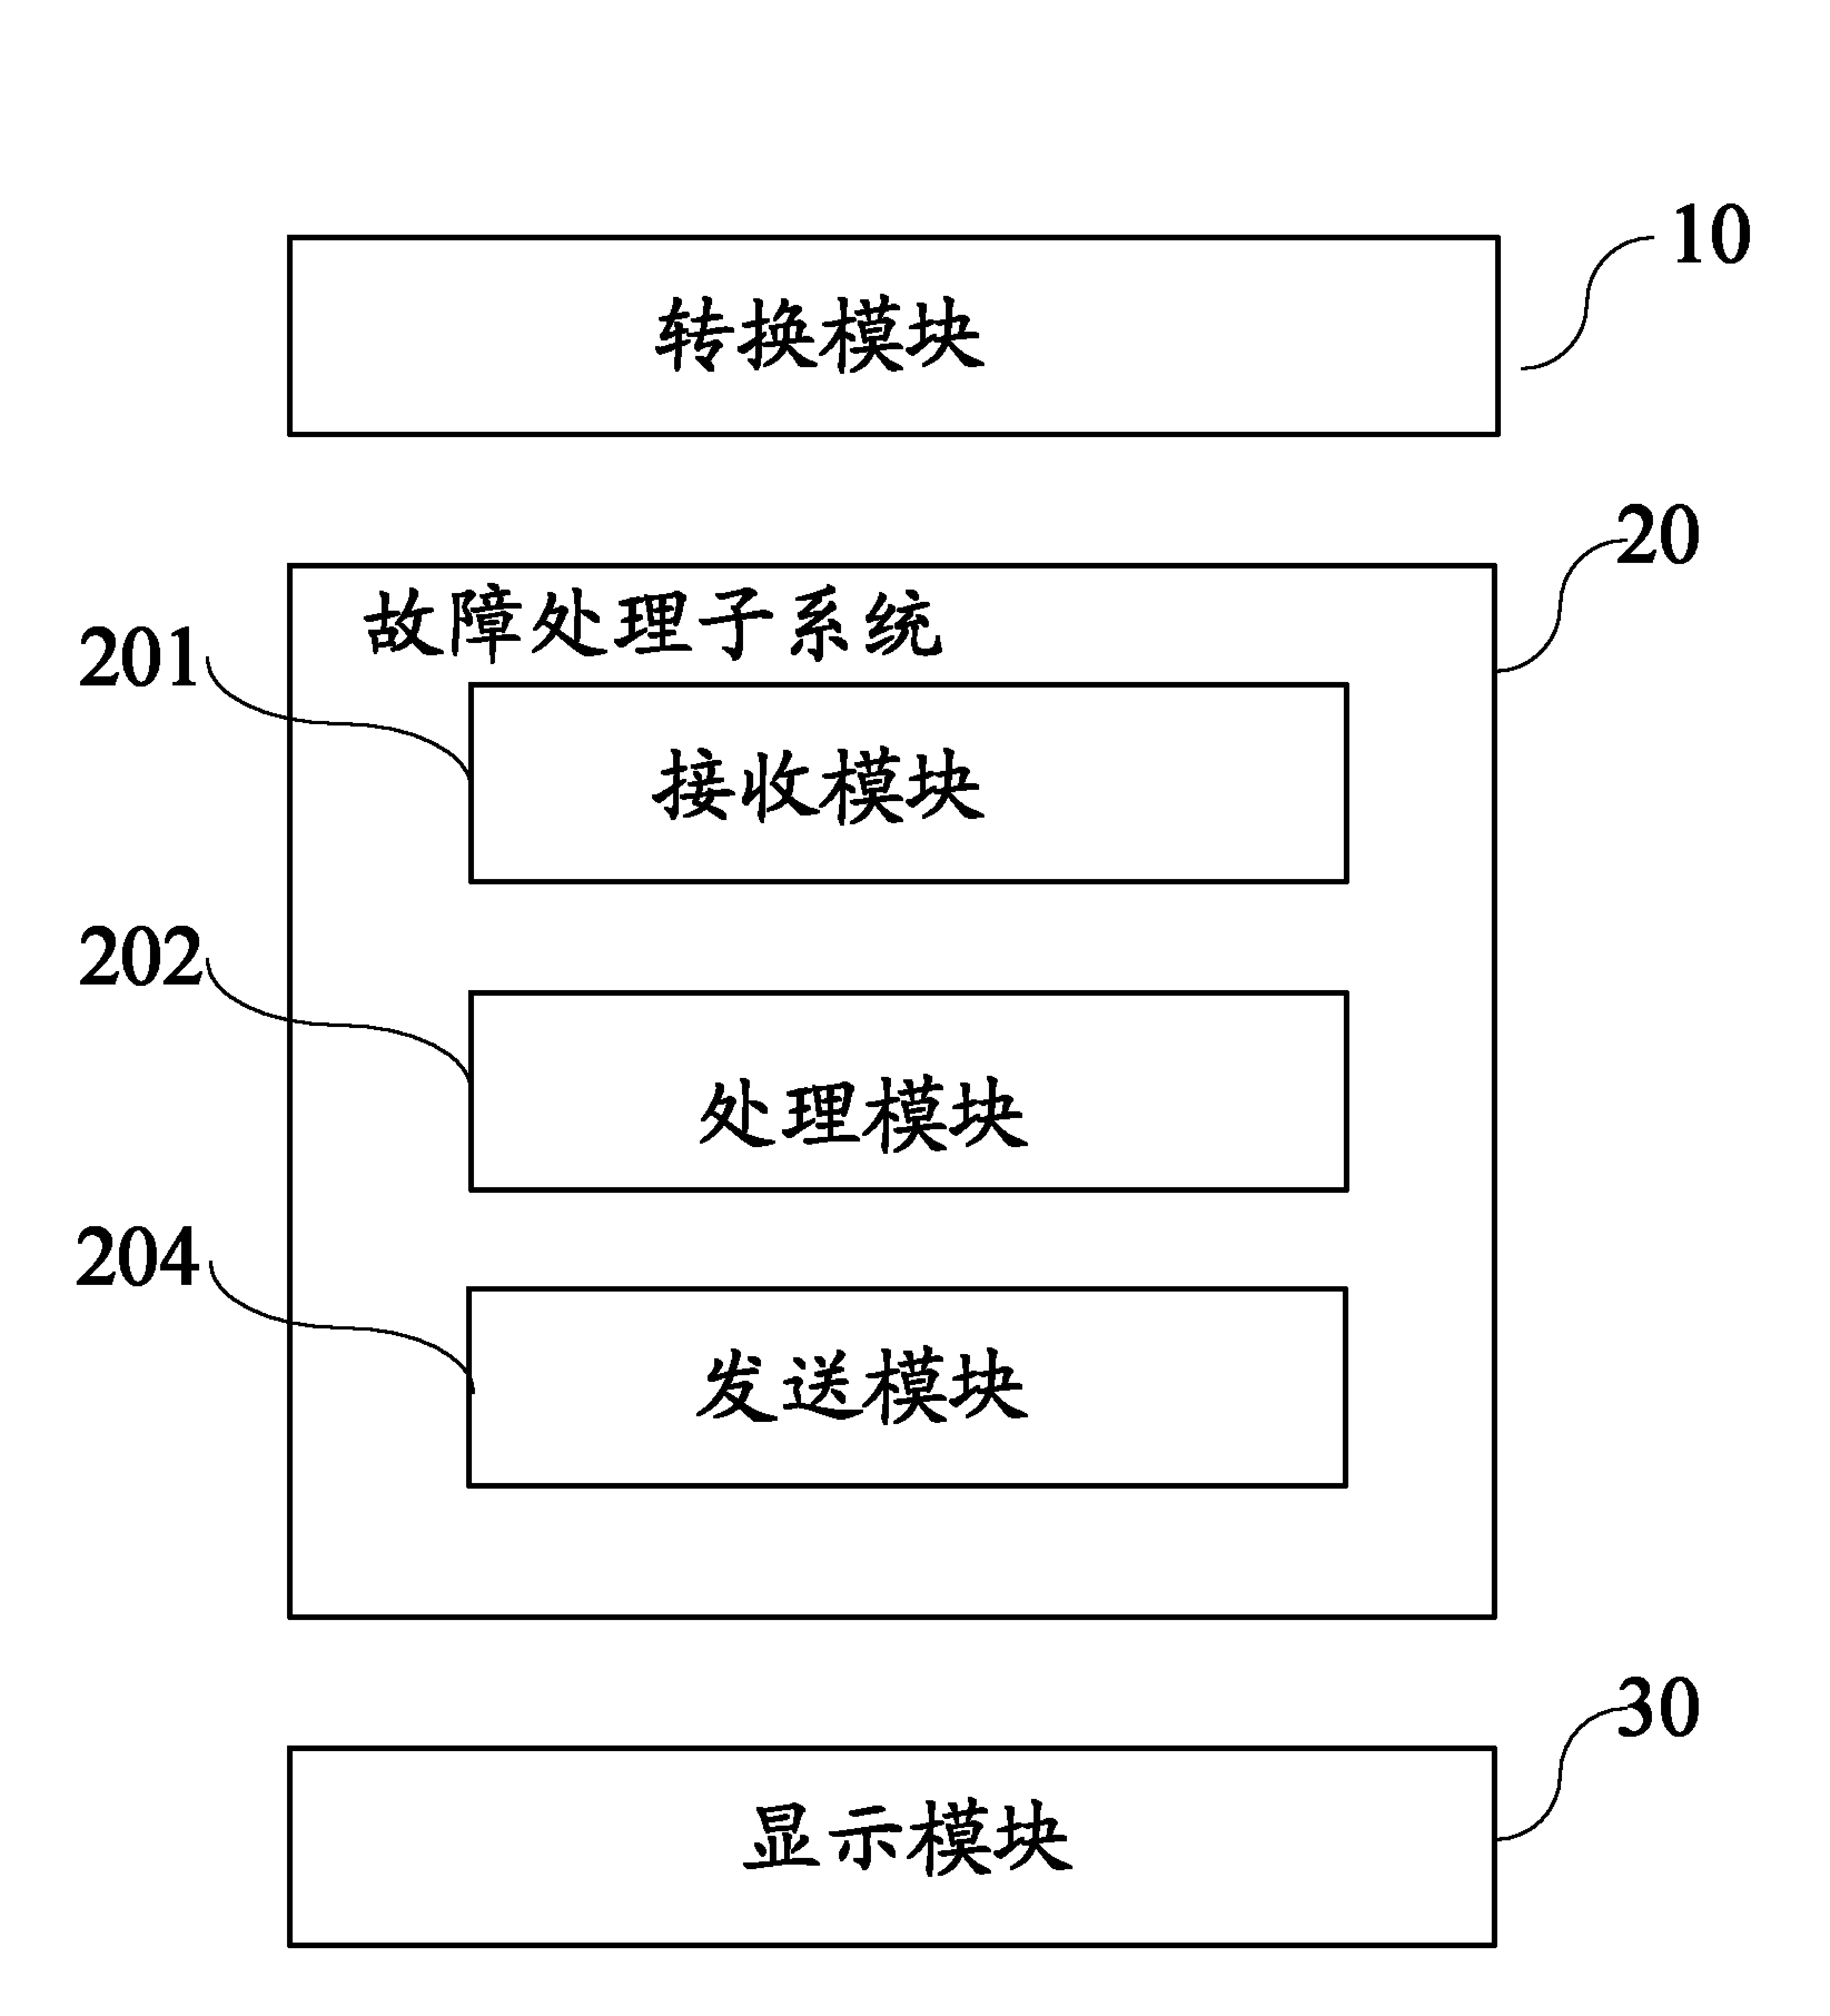 Fault processing system and method